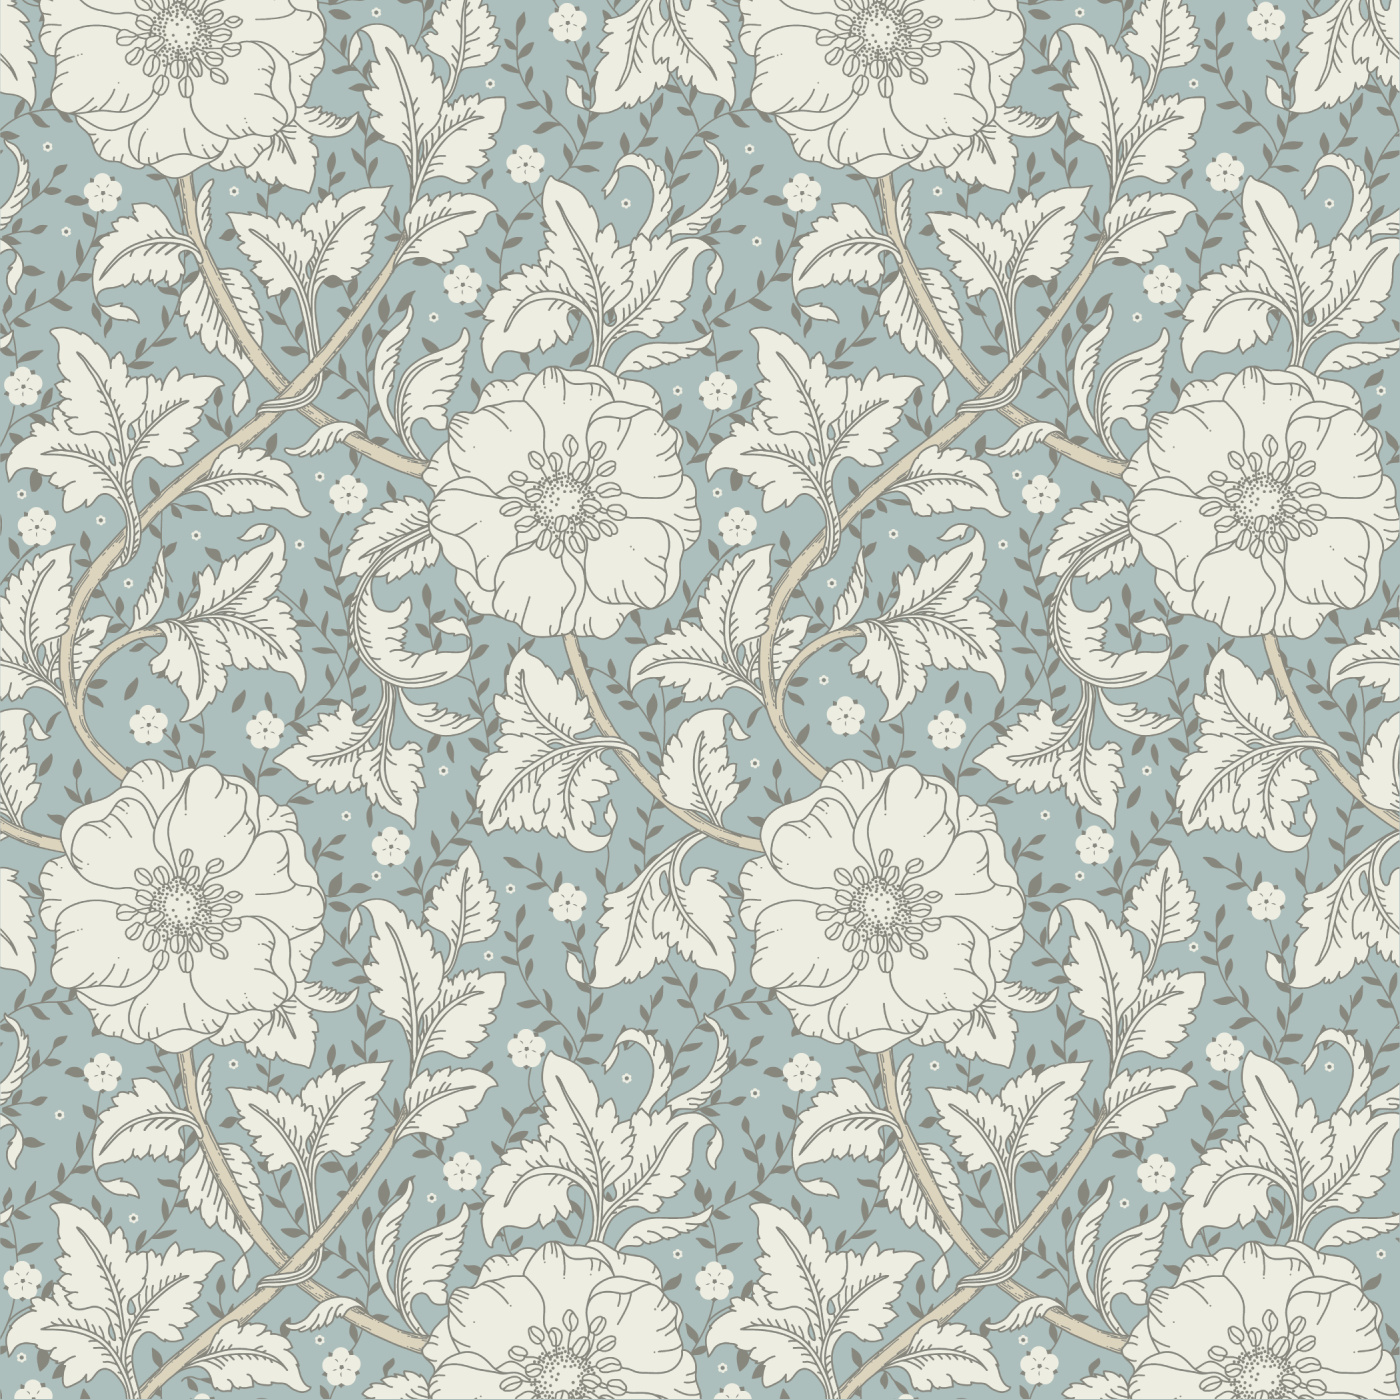 Wild Strawberry Blooms Peel and Stick Removable Wallpaper | Love vs. Design